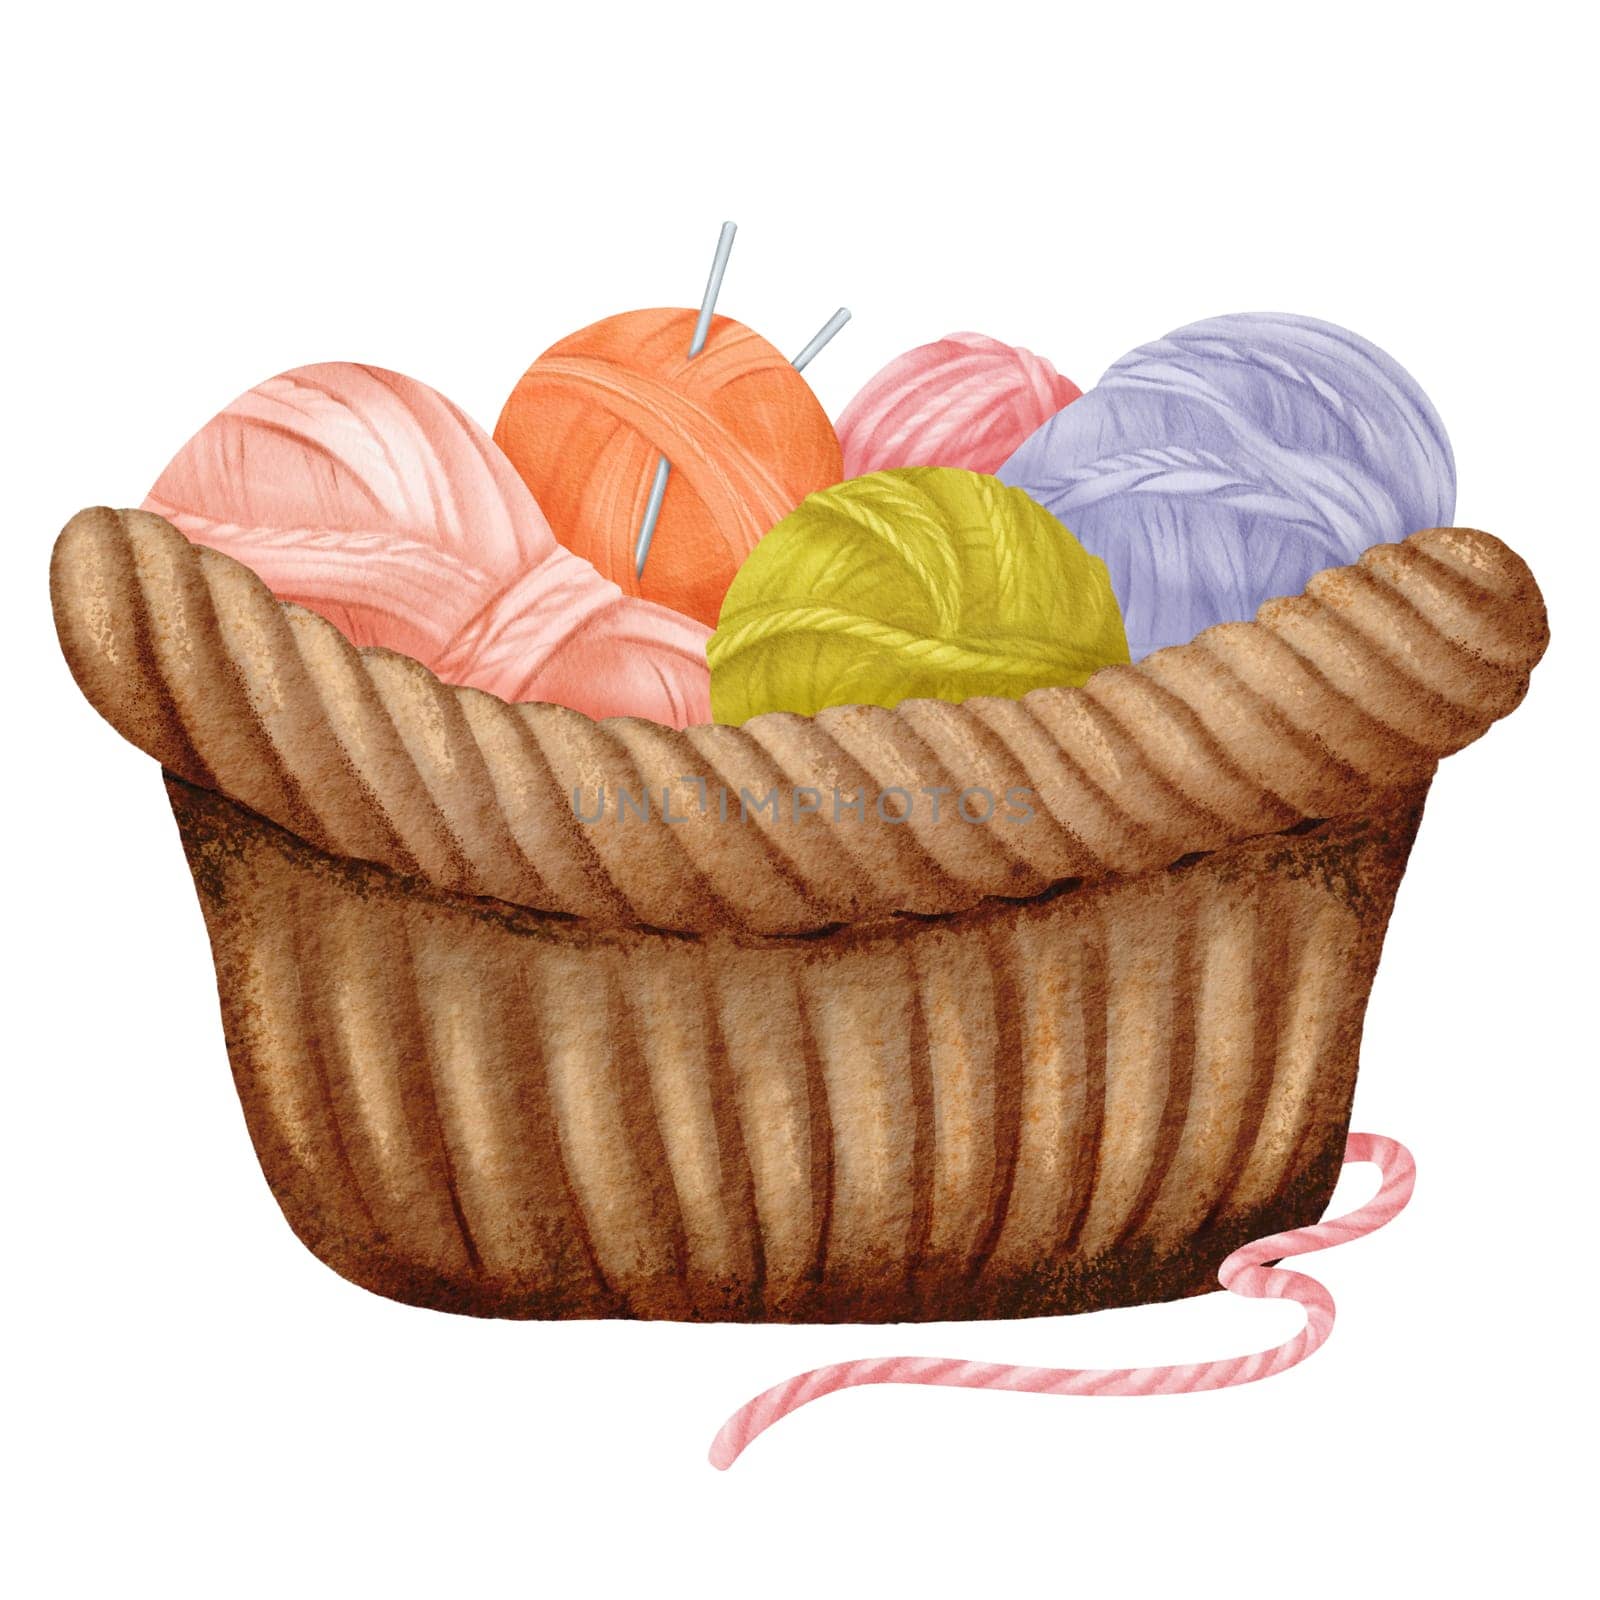 arrangement showcasing woven basket adorned with multicolored yarn balls and knitting needles. Ideal for crafting enthusiasts, cozy home decor themes, or DIY-inspired designs. Watercolor illustration by Art_Mari_Ka